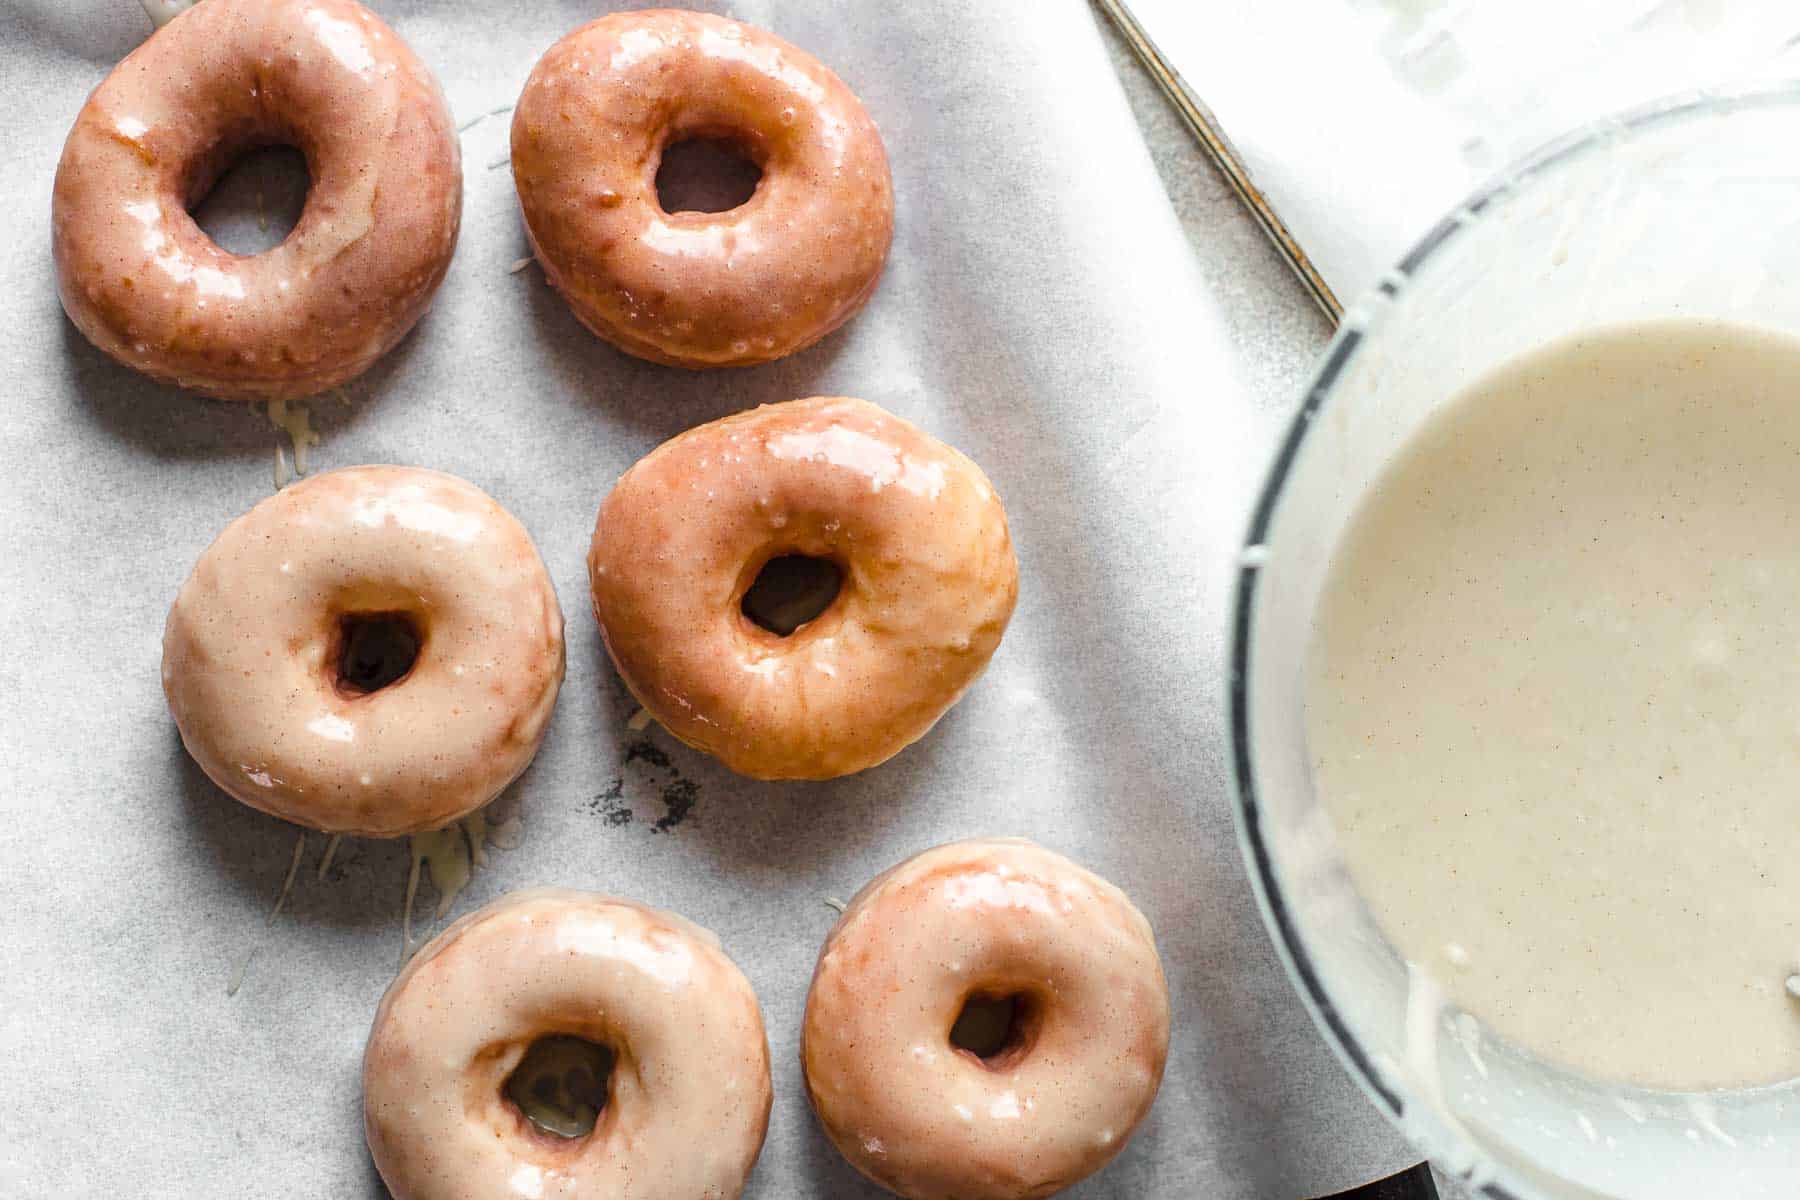 Freshly glazed doughnuts on parchment paper